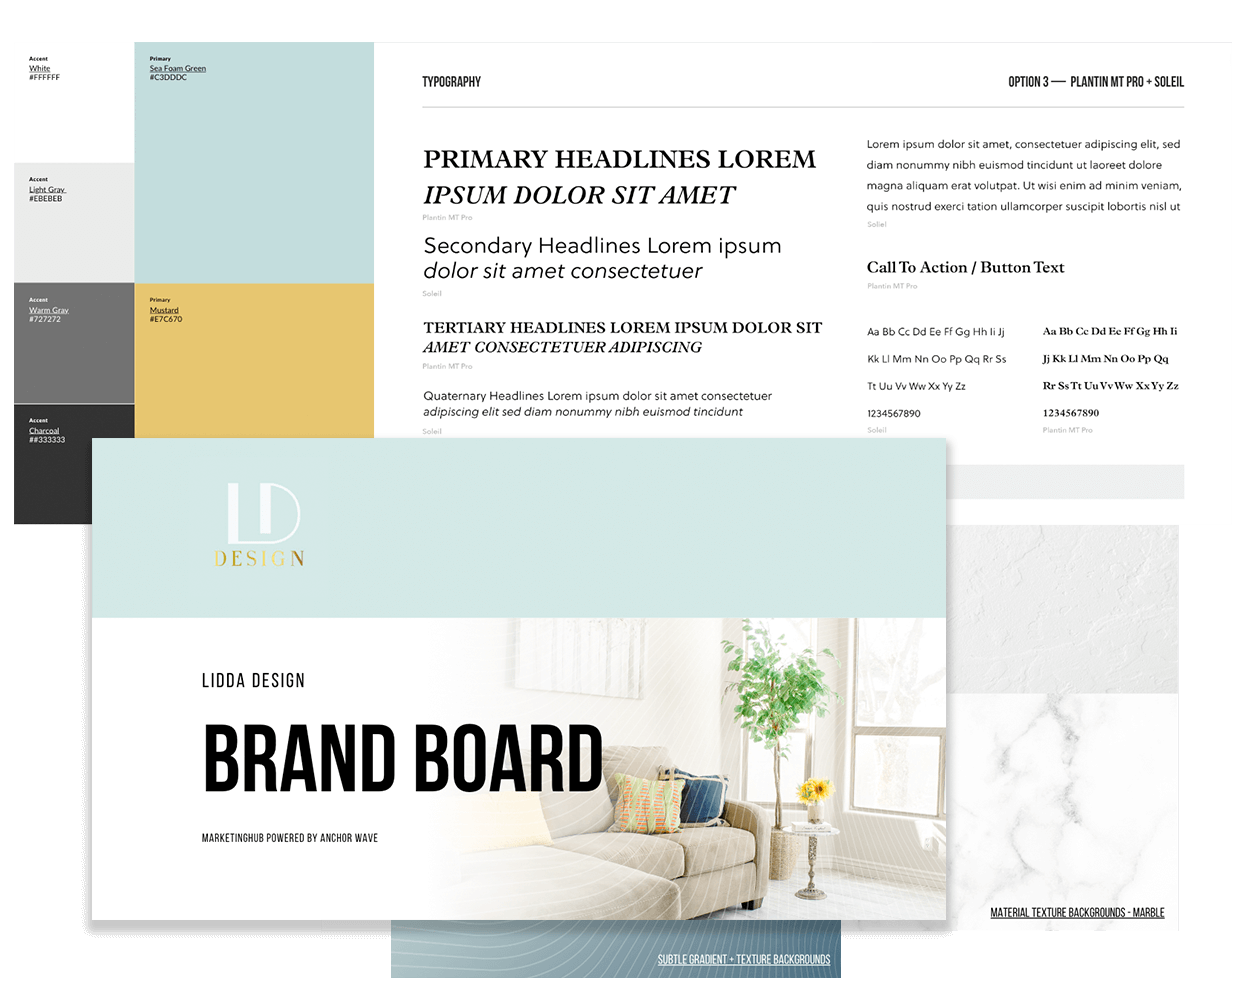 An example of brand guidelines showing fonts, colors, and logos